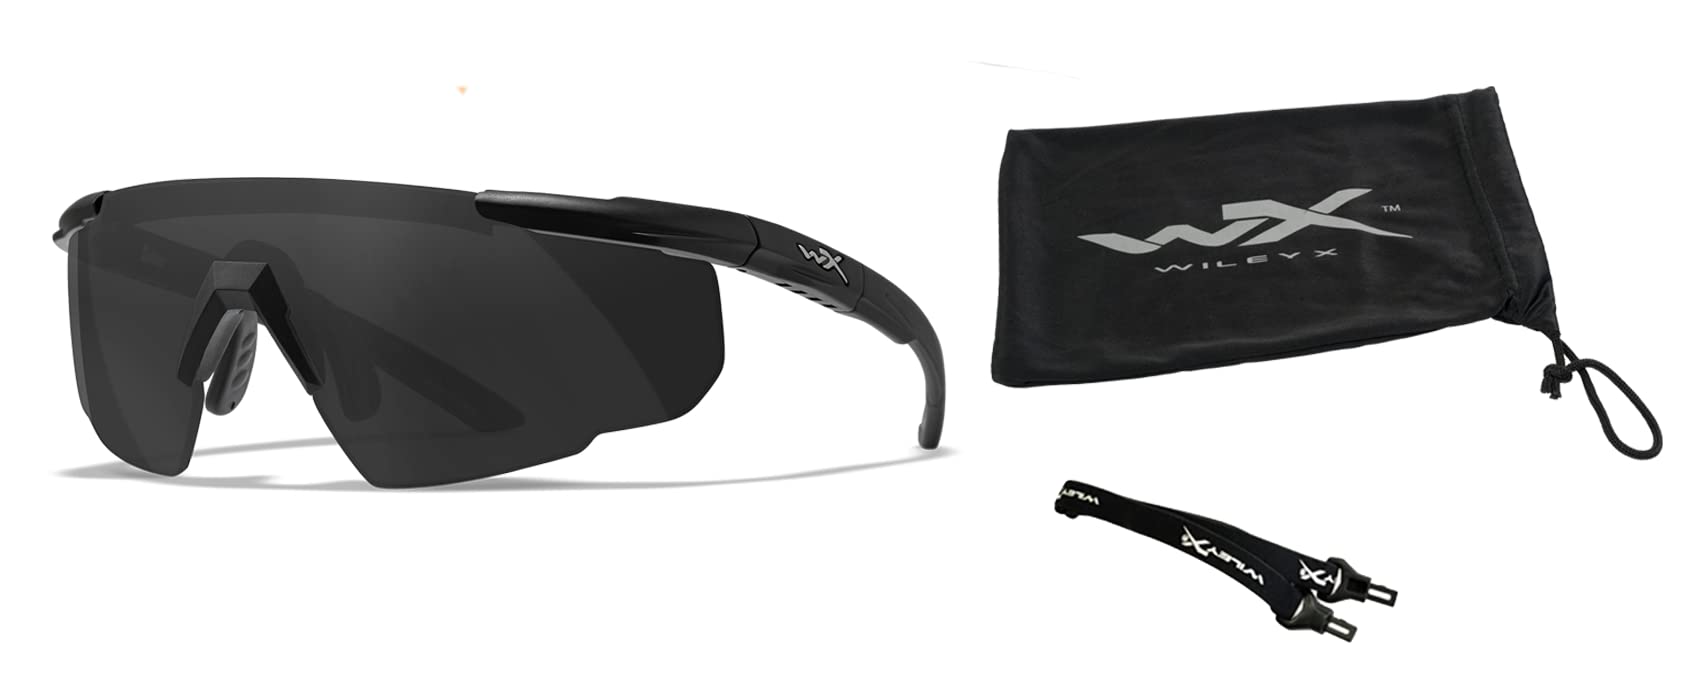 Wiley X Saber Advanced Shooting Glasses, Safety Sunglasses for Men and  Women, UV and Eye Protection